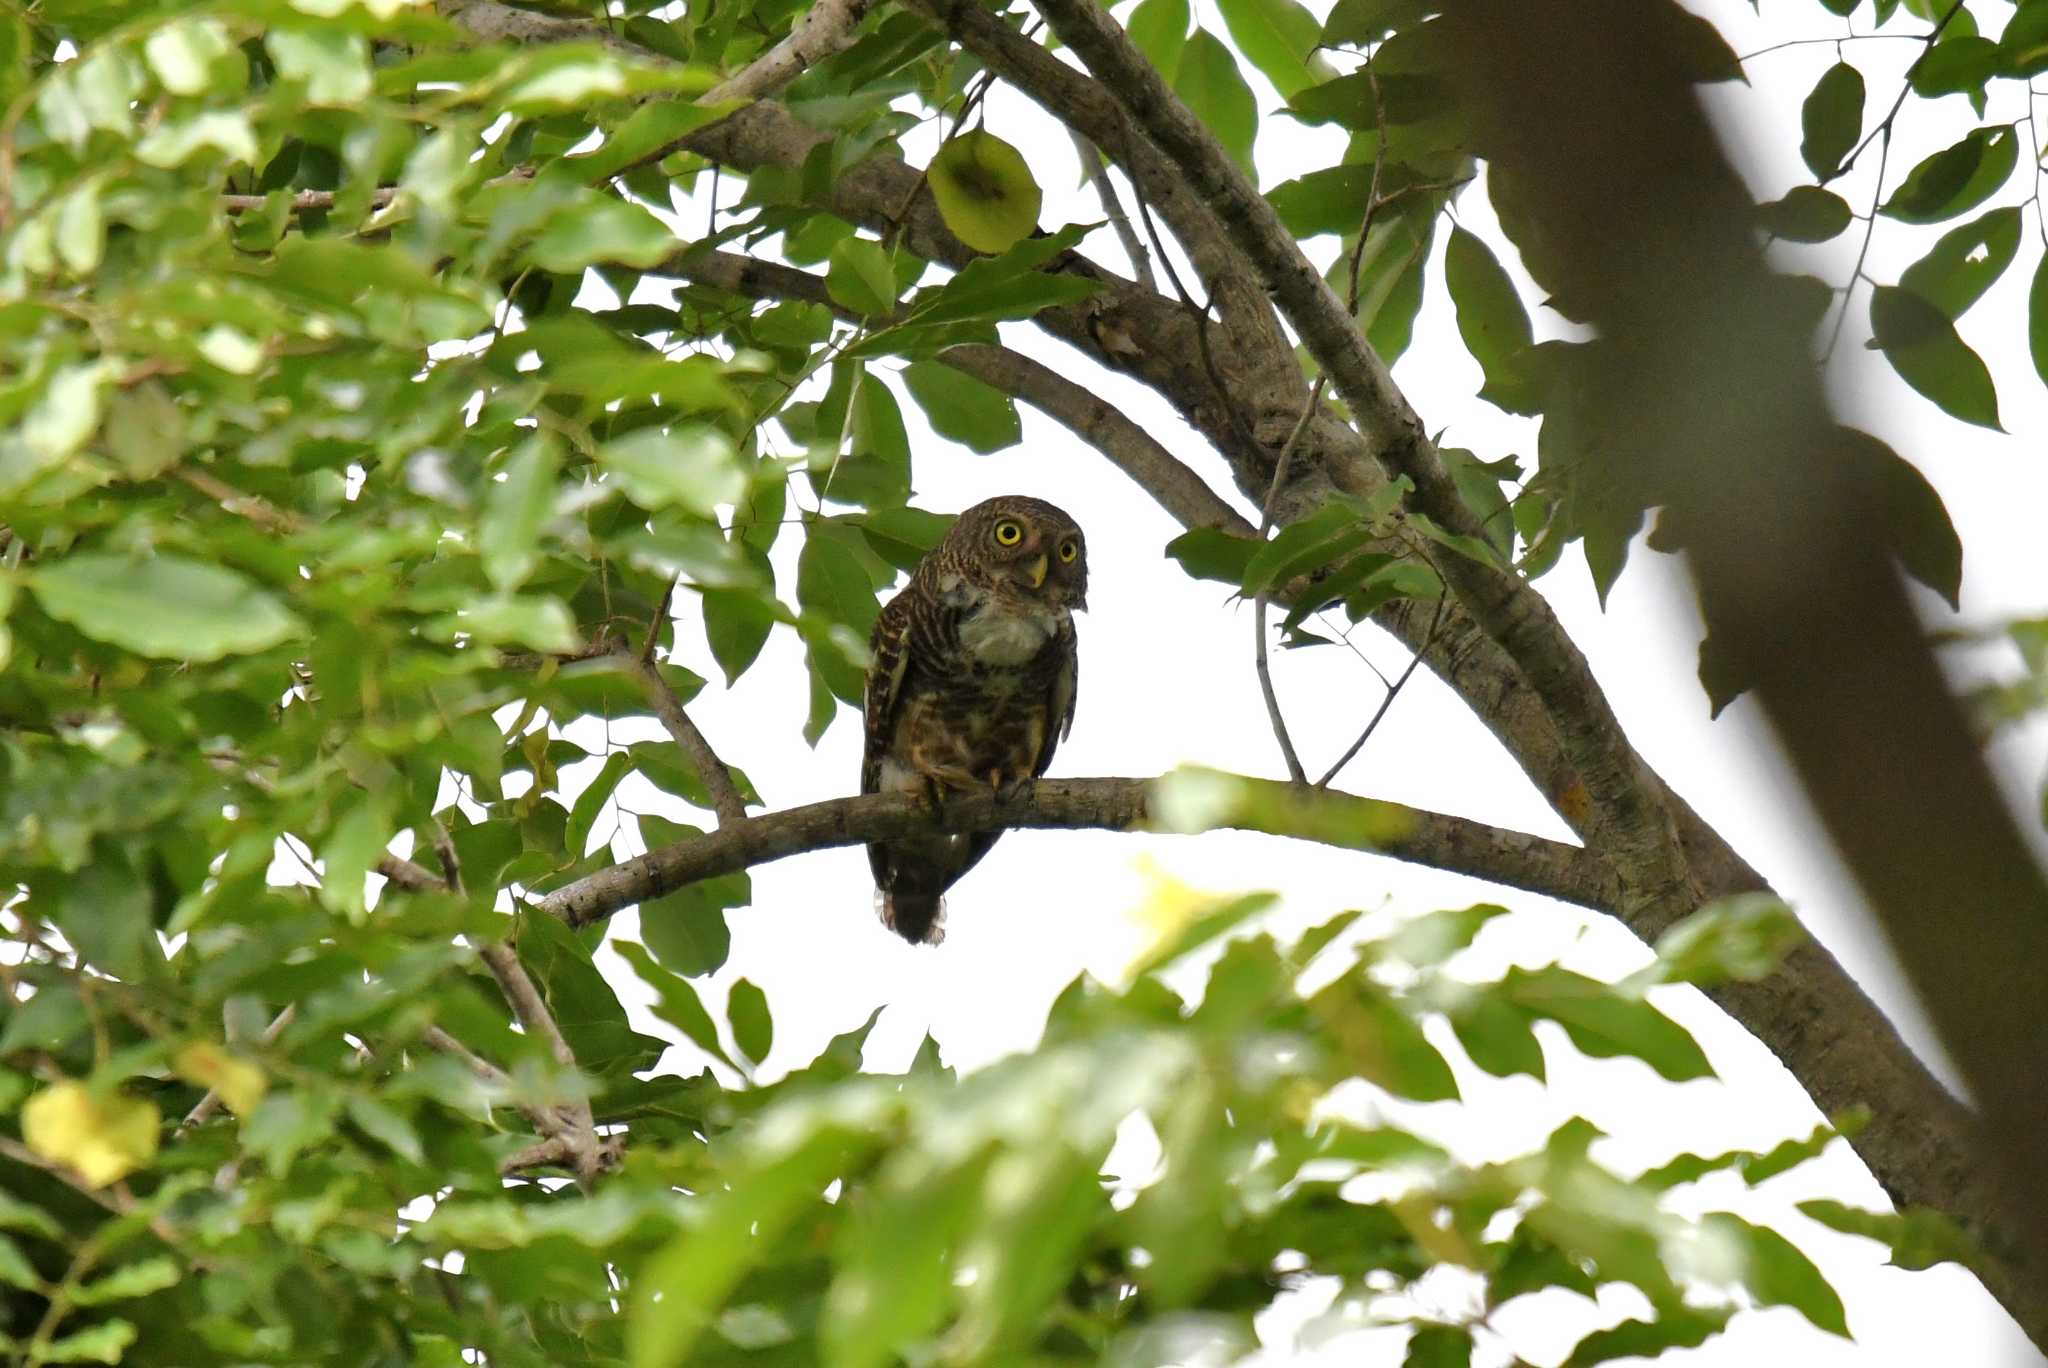 Photo of Asian Barred Owlet at タイ by あひる